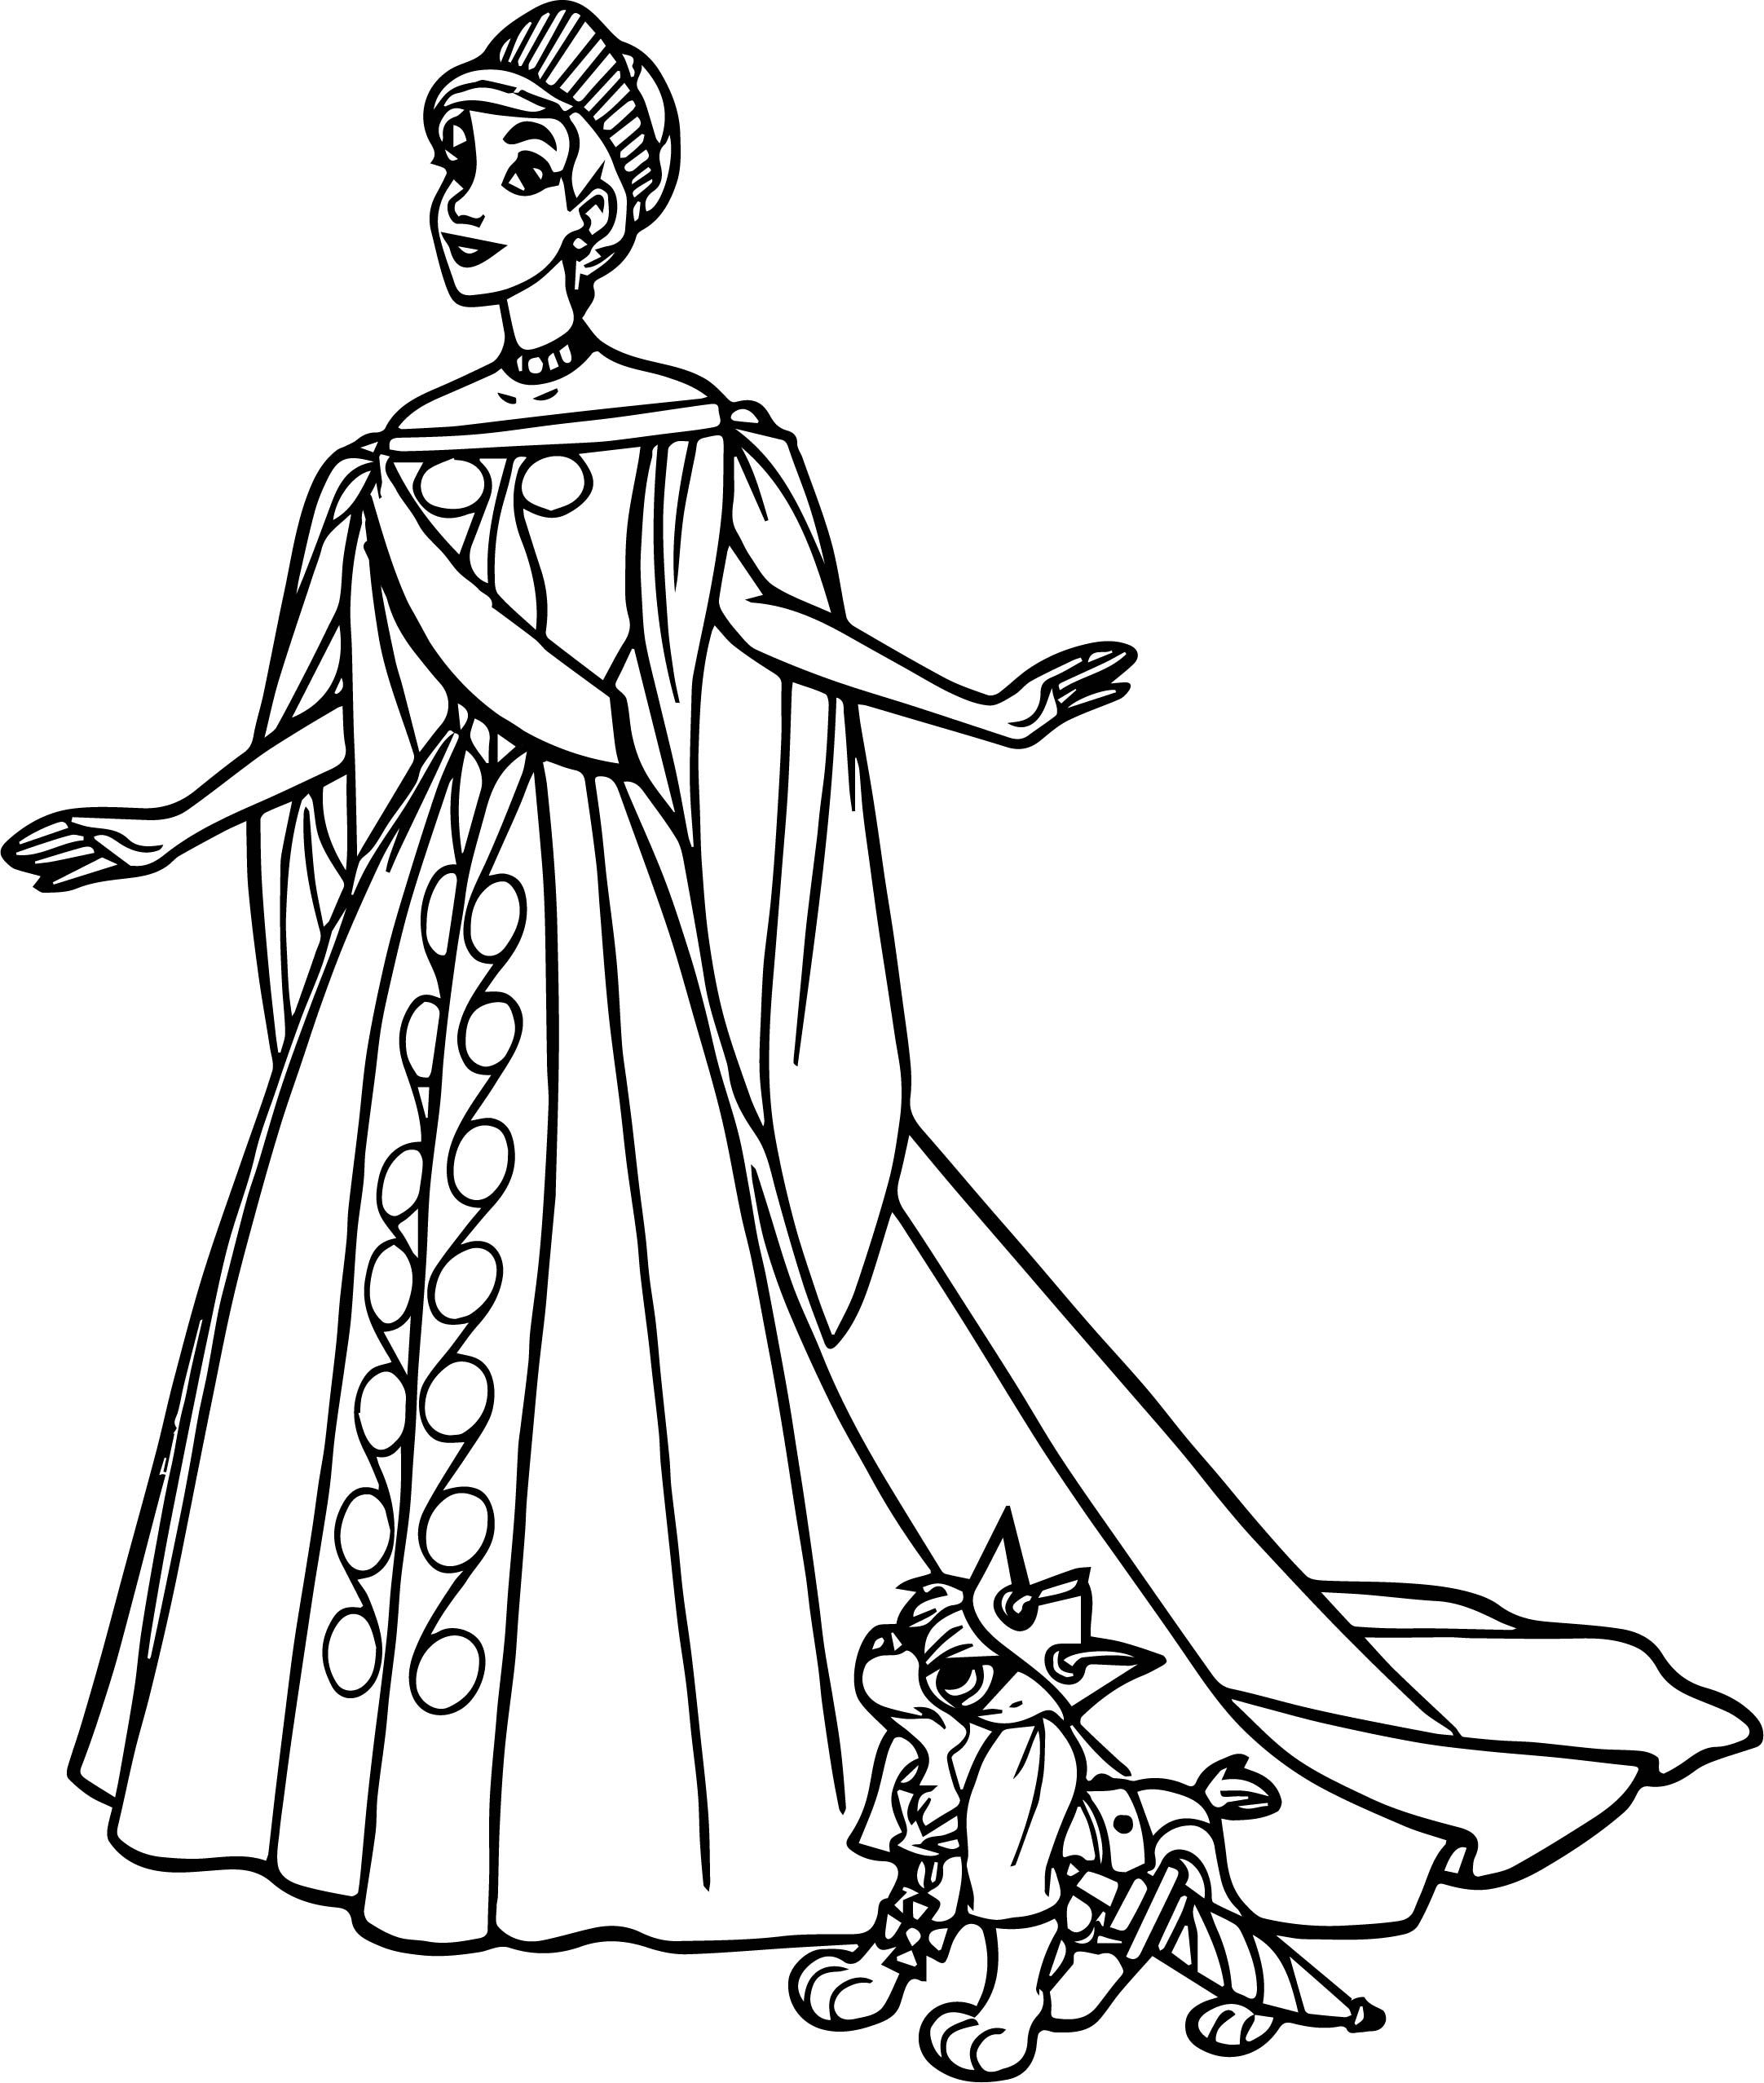 awesome Anastasia In White Dress Coloring Page | Coloring pages, Disney coloring  pages, Disney princess coloring pages